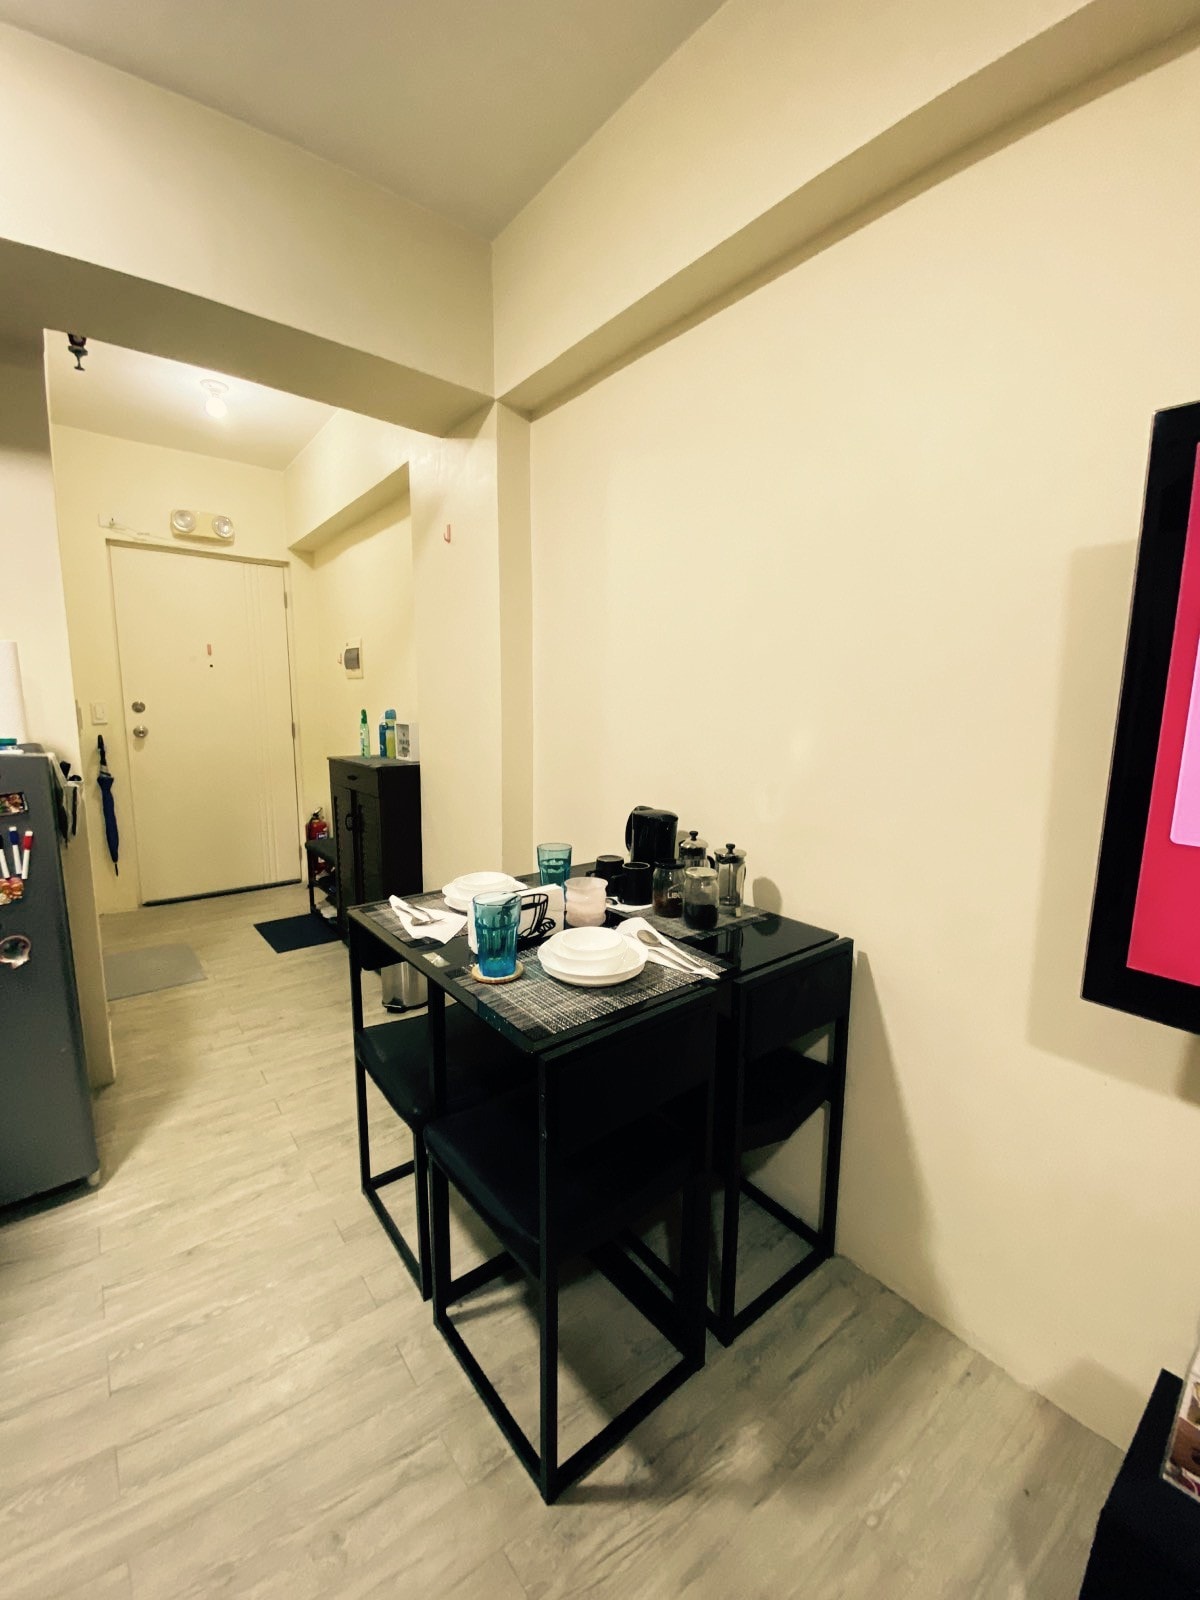 Condo Unit for Gamers/Remote Workers